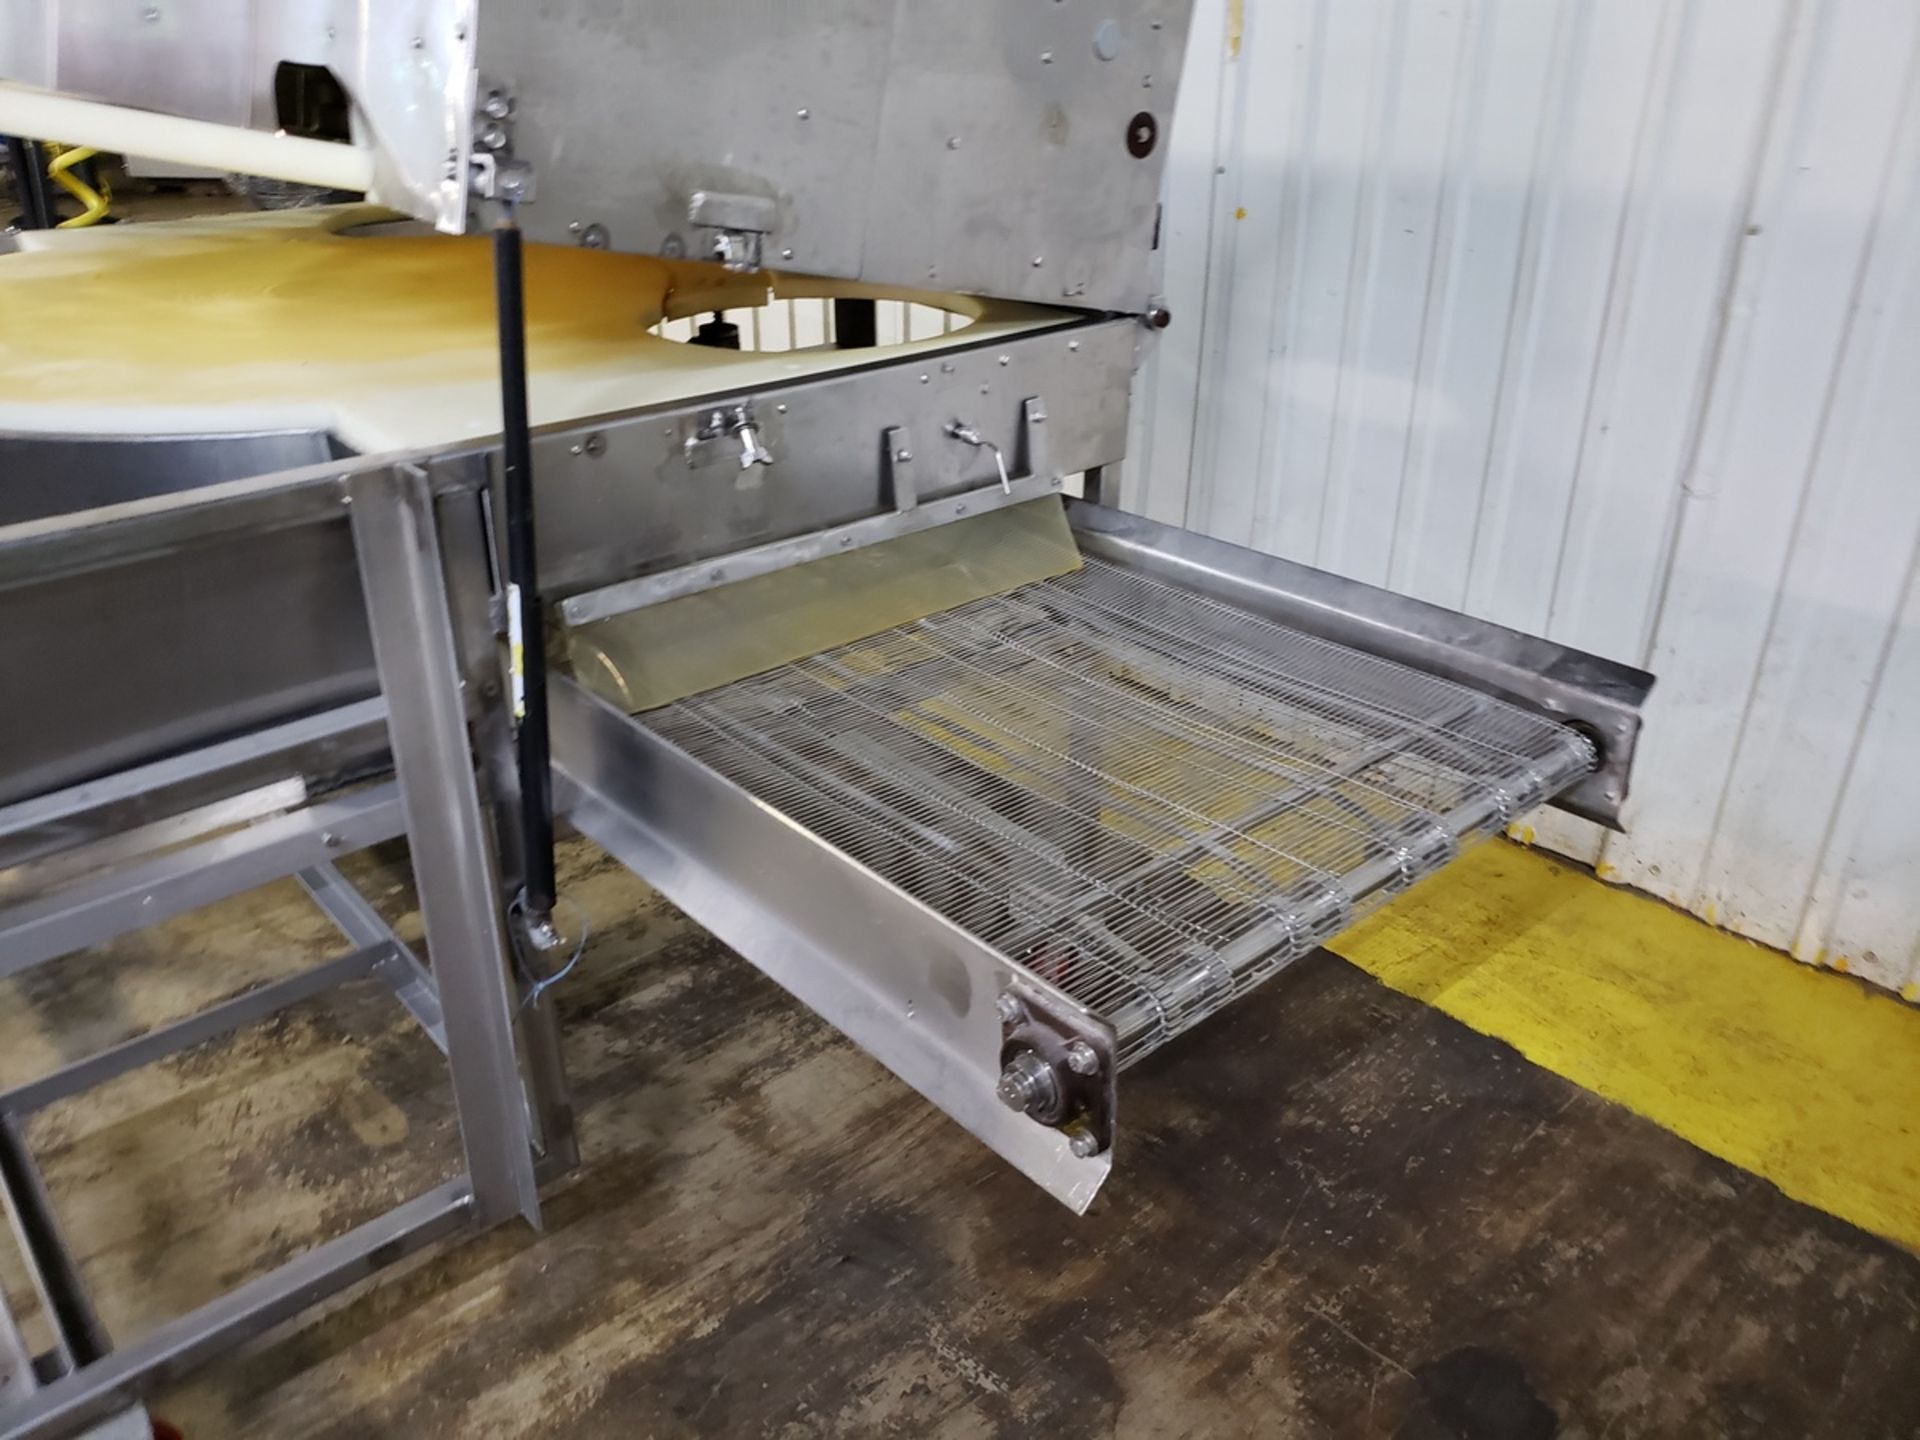 16 Station Carousel Type Continuous Onion Slicer, Dual Blade | Rig Fee: $250 - Image 4 of 4